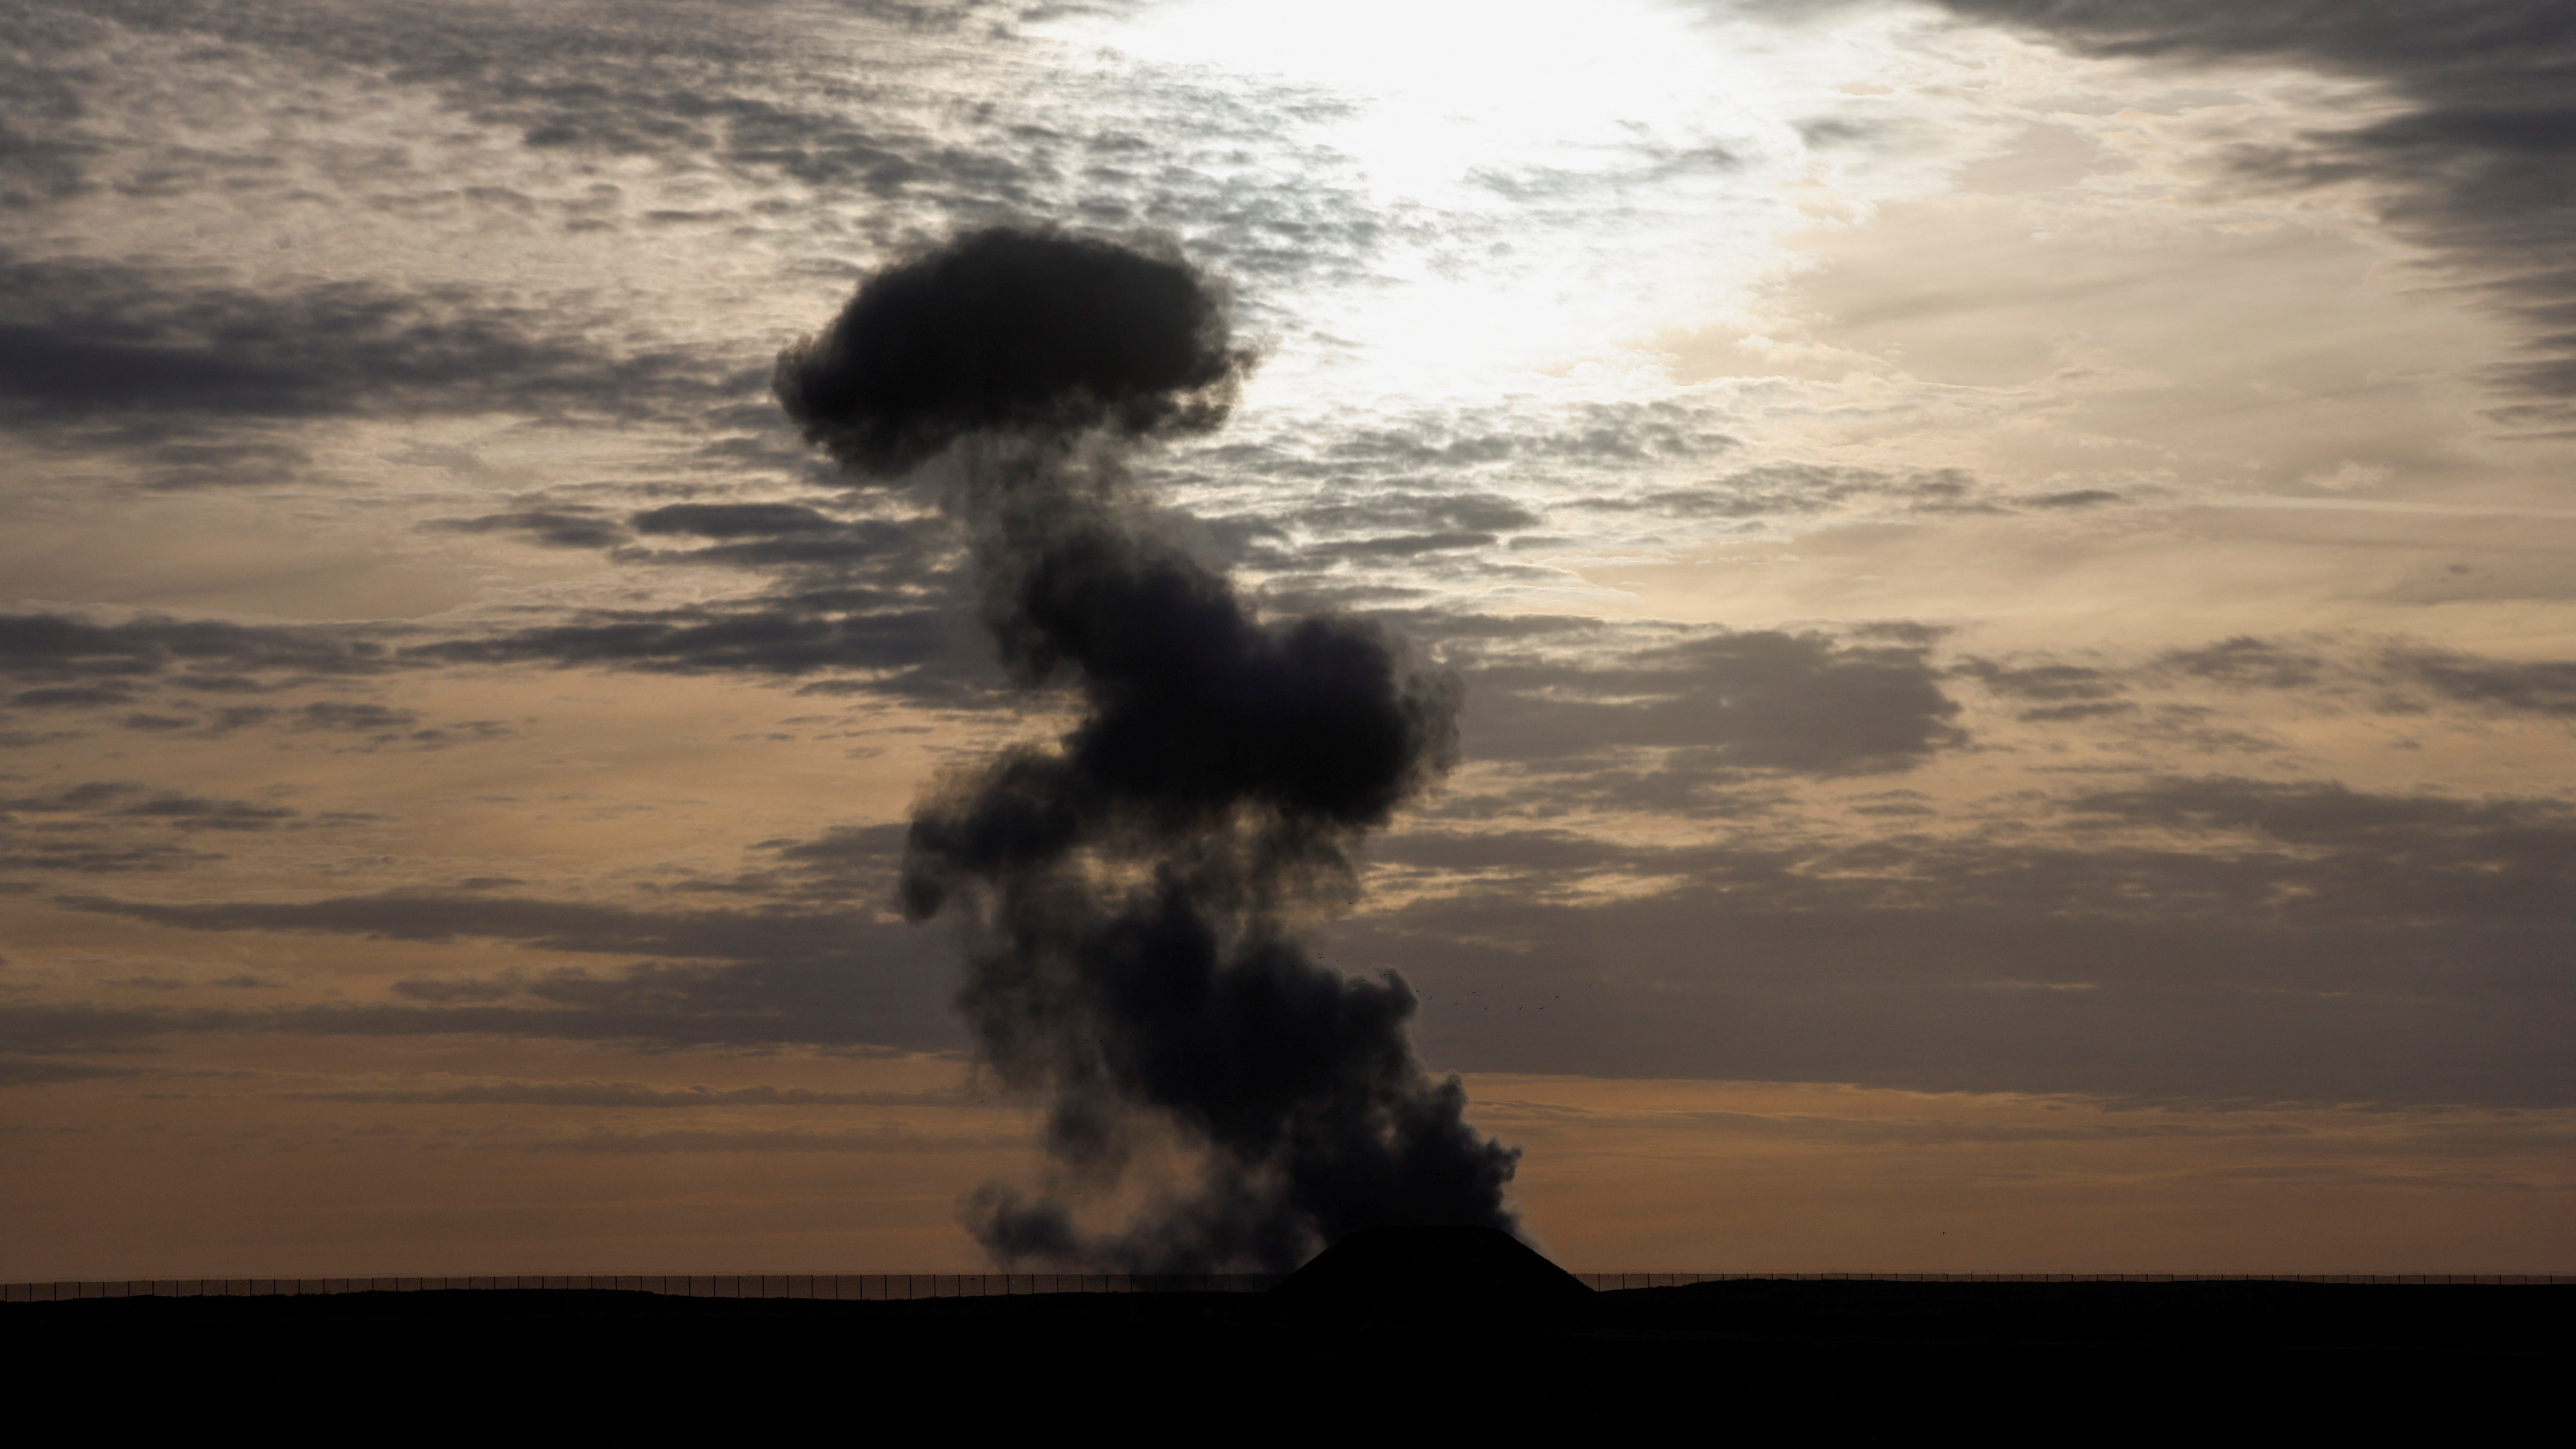 Smoke rises after an explosion in Gaza, as seen from Israel's border with Gaza in southern Israel. /Amir Cohen/Reuters